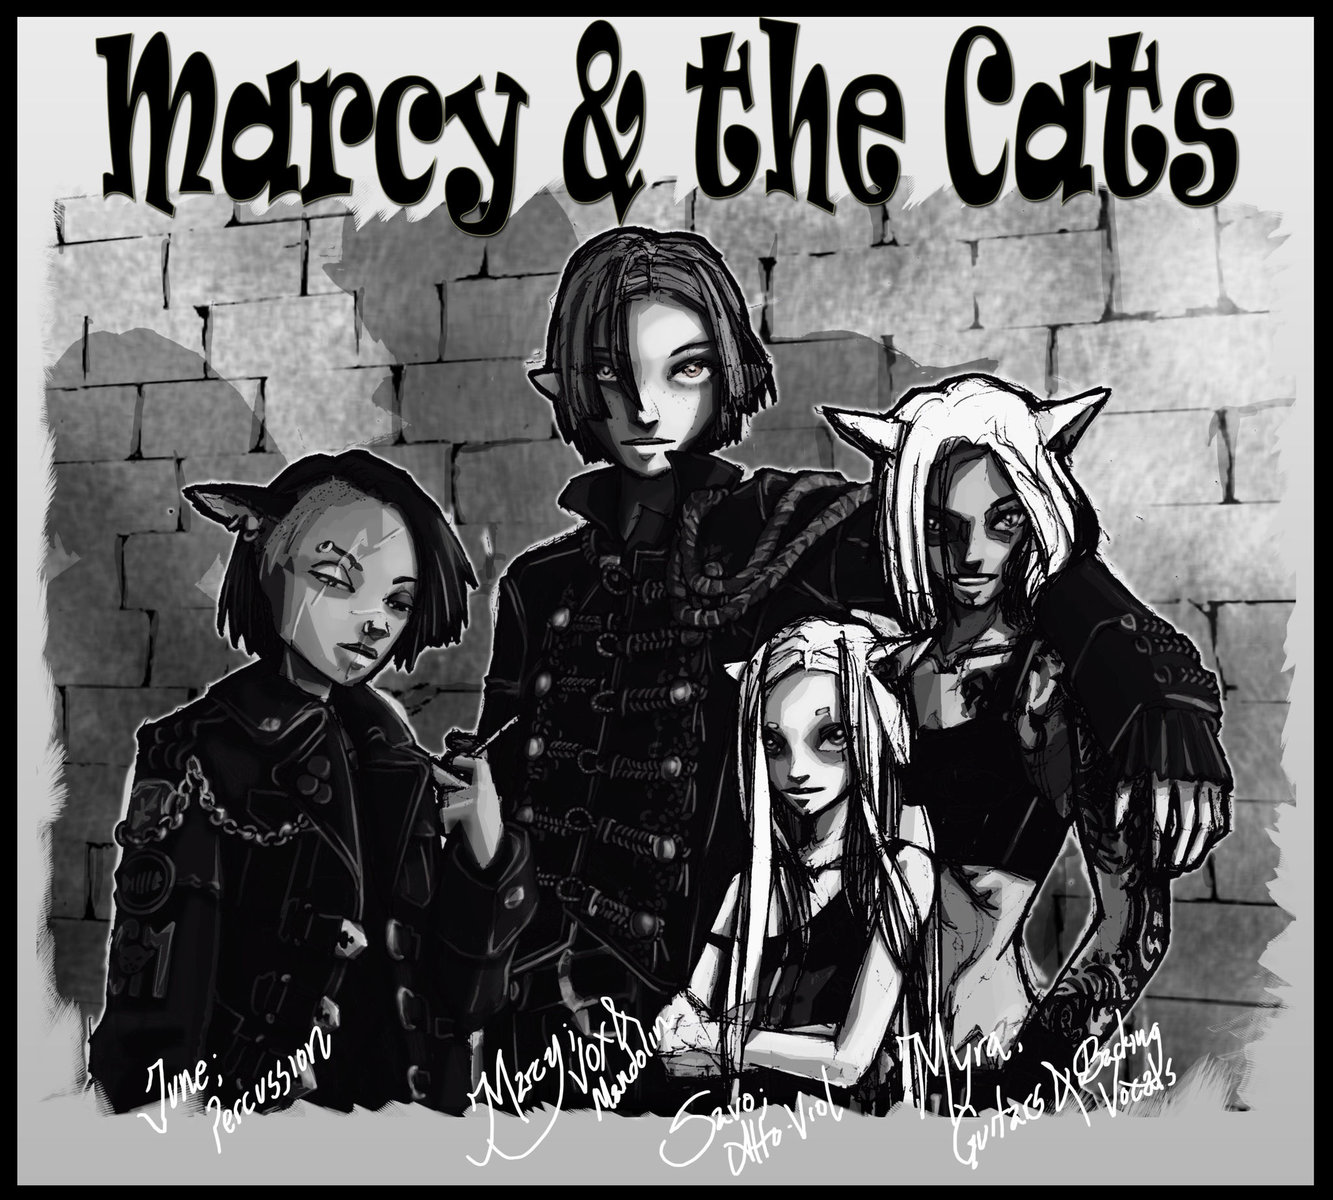 Marcy and the Cats